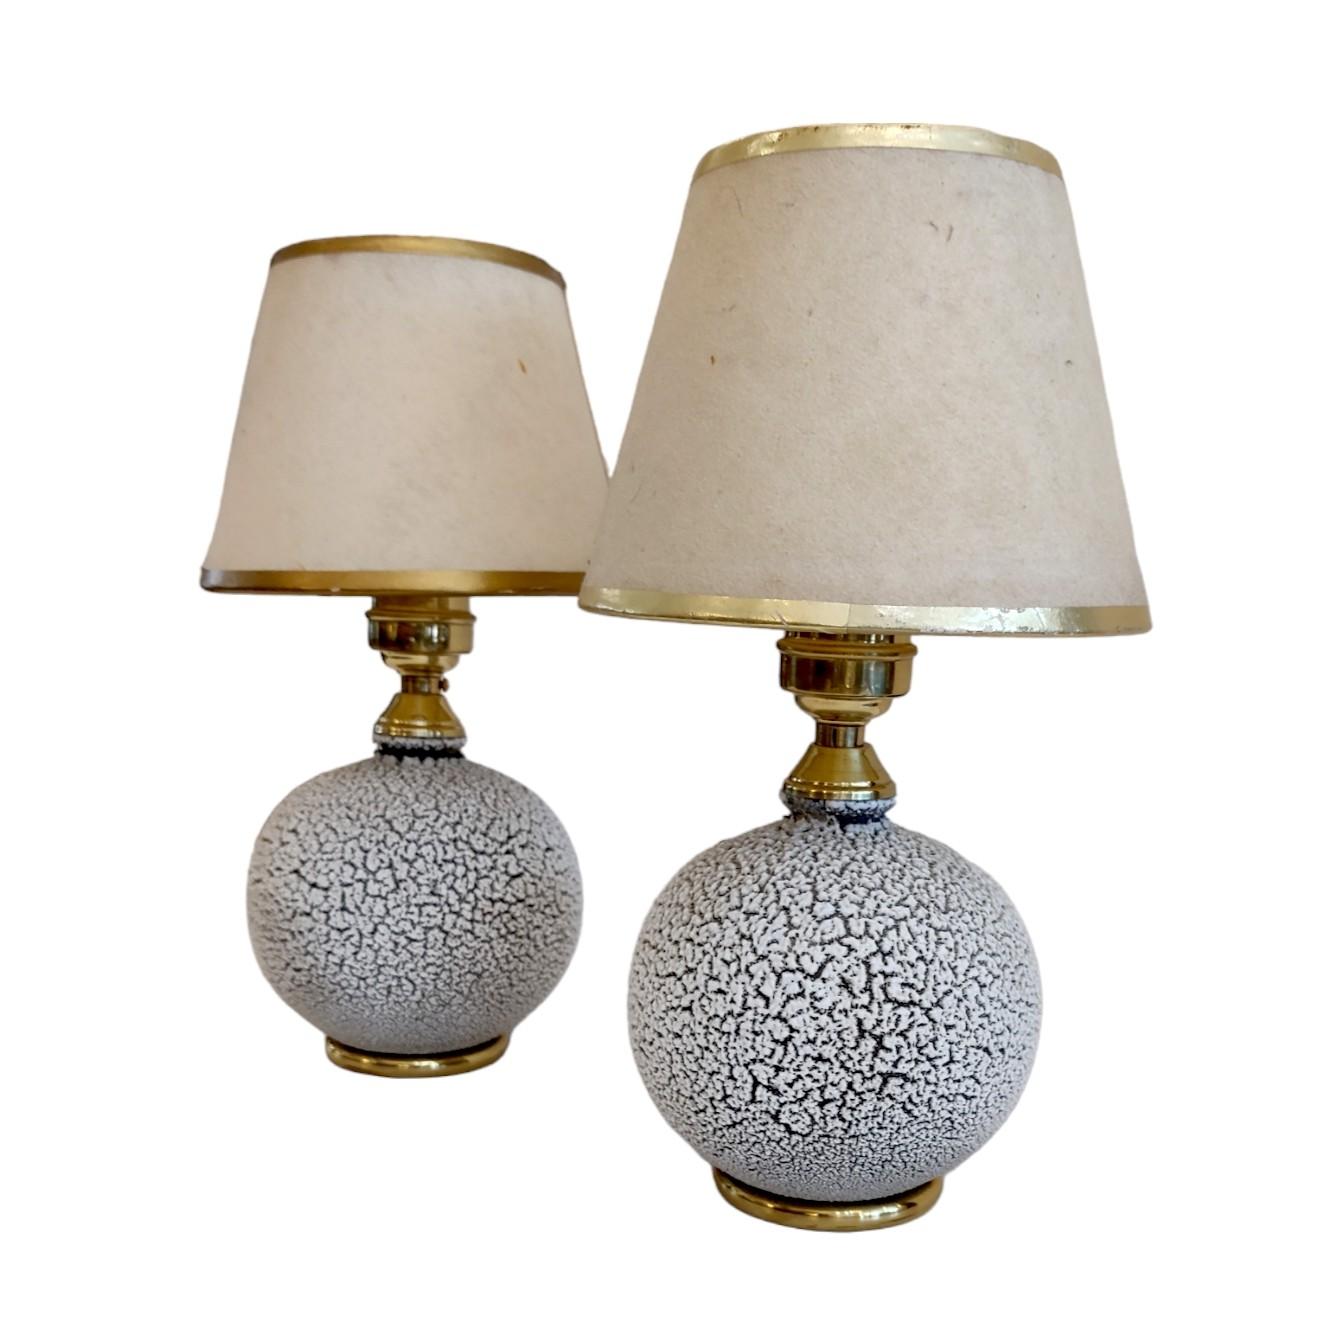 Bronze Paul Milet Style French Art Deco Table Lamps, 1930s For Sale